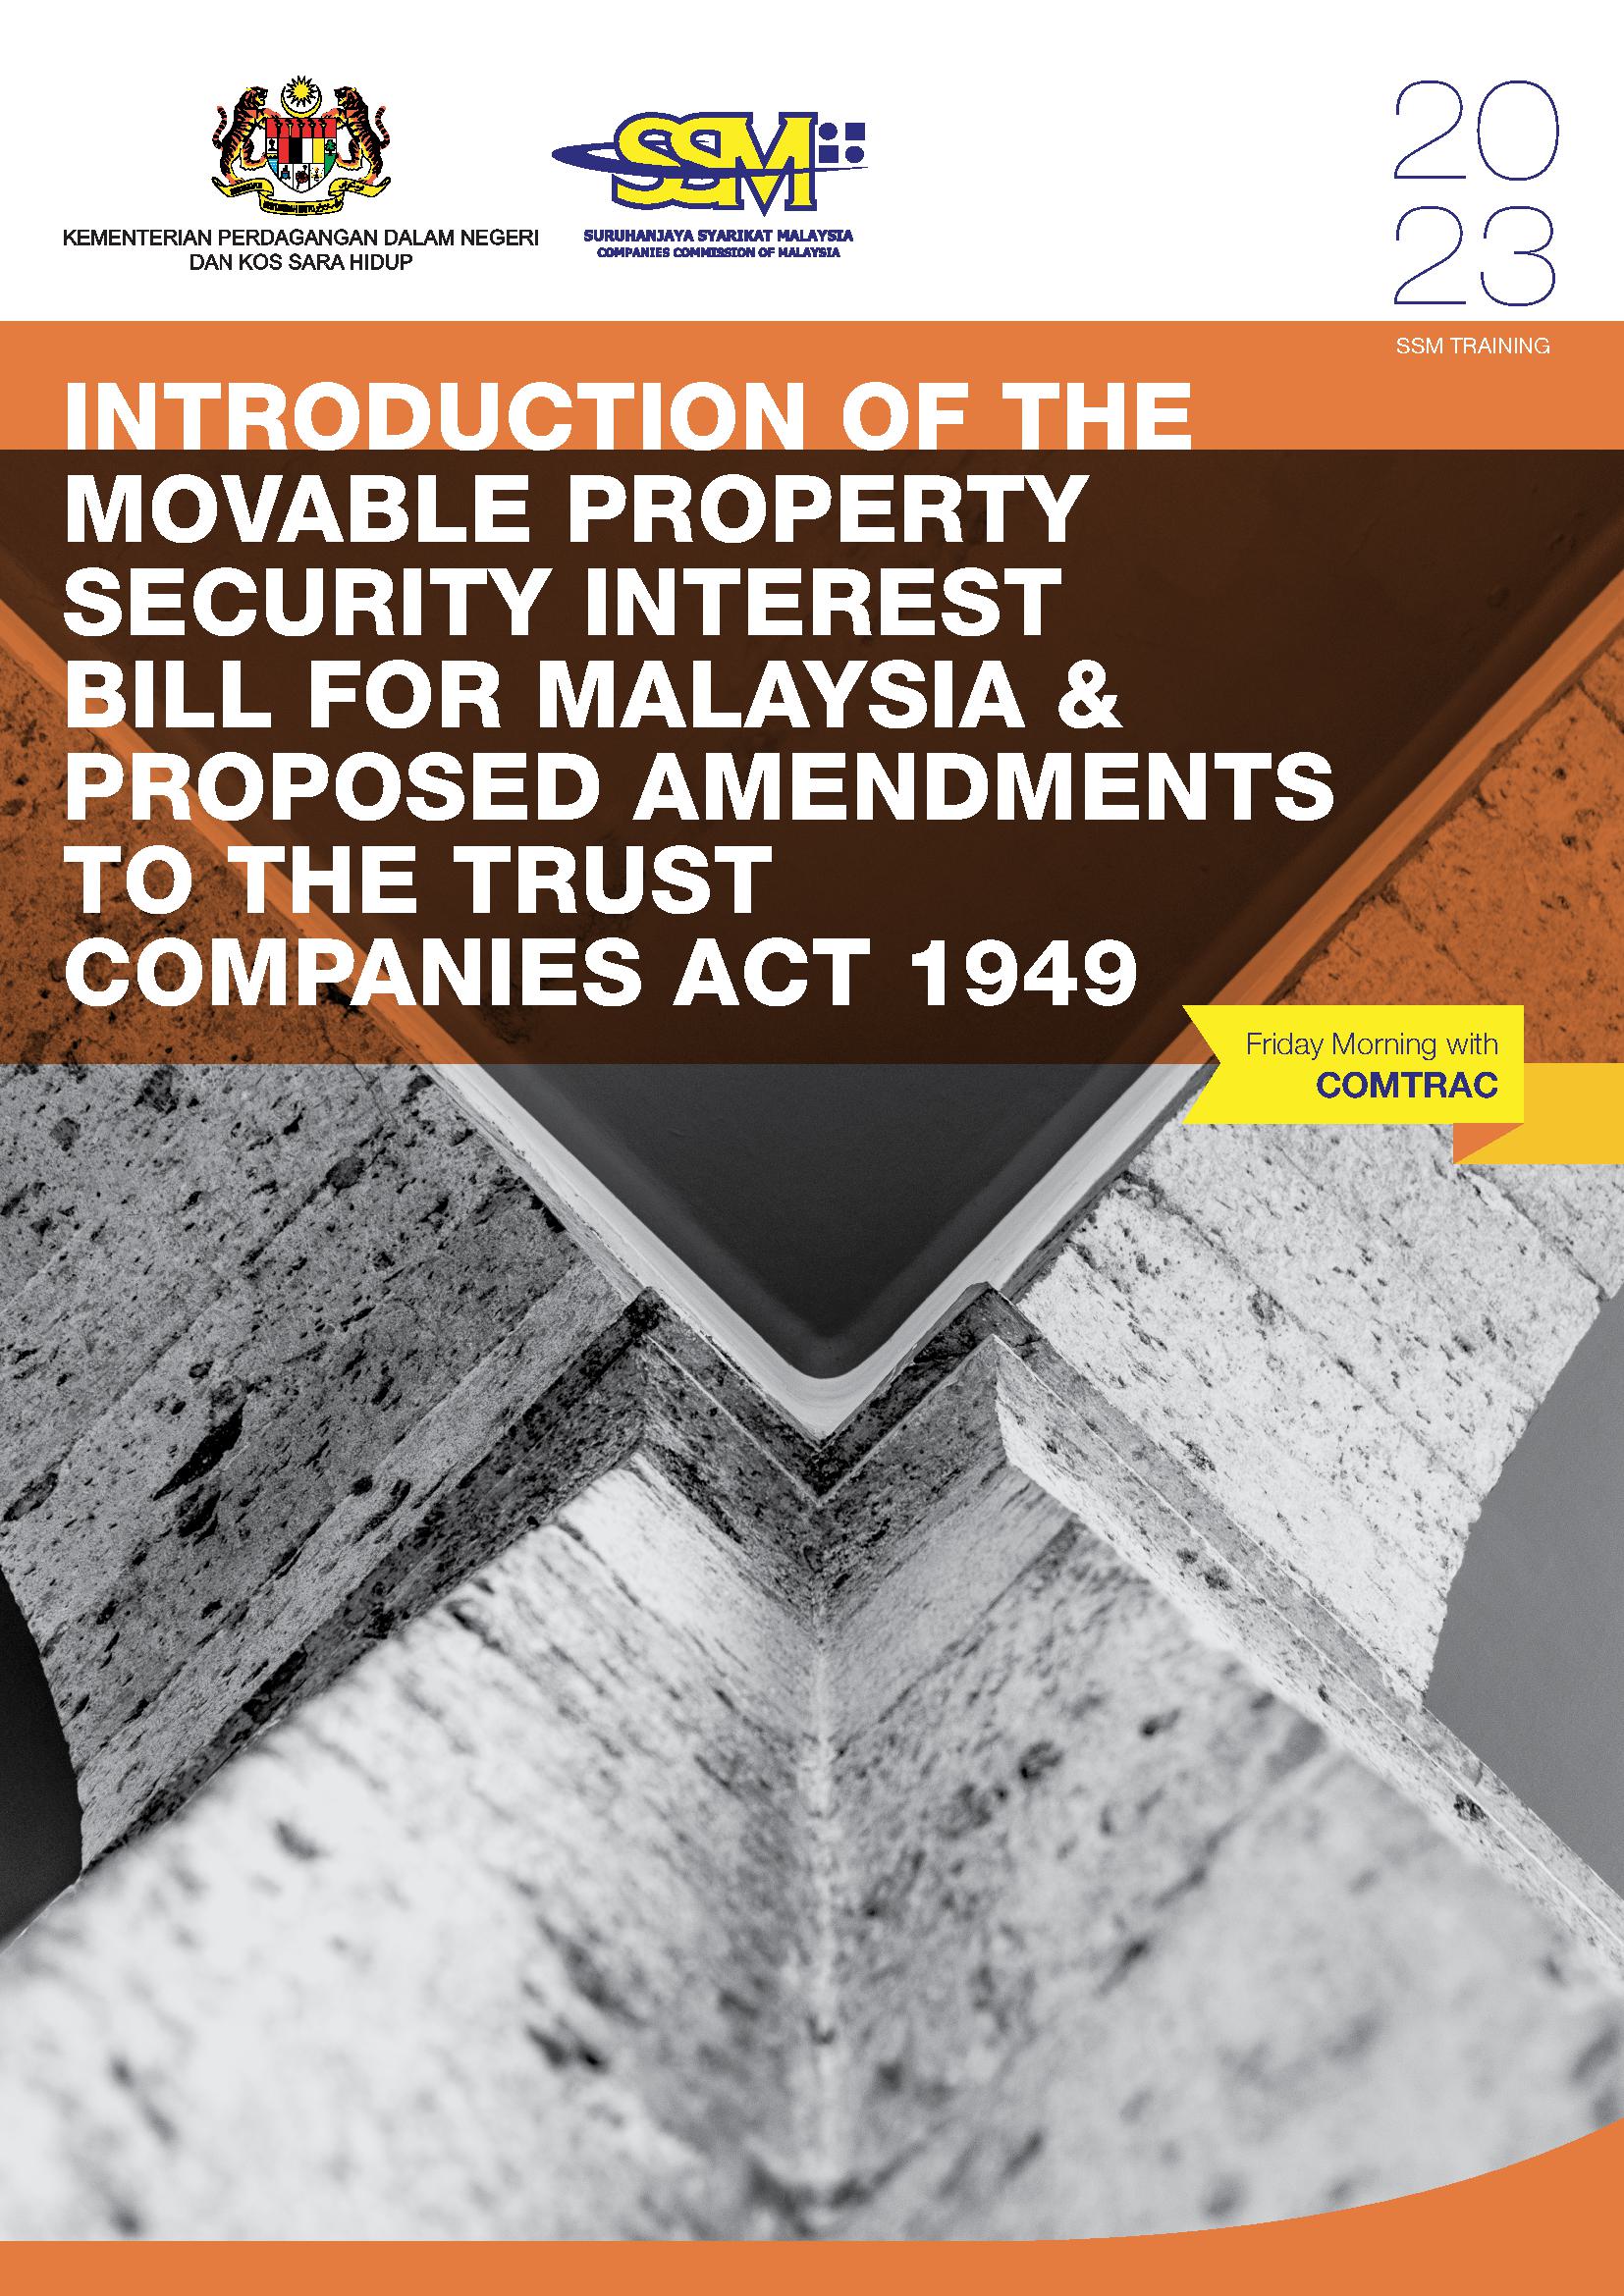 INTRODUCTION OF THE MOVABLE PROPERTY SECURITY INTEREST BILL FOR MALAYSIA & PROPOSED AMENDMENTS TO THE TRUST COMPANIES.jpg